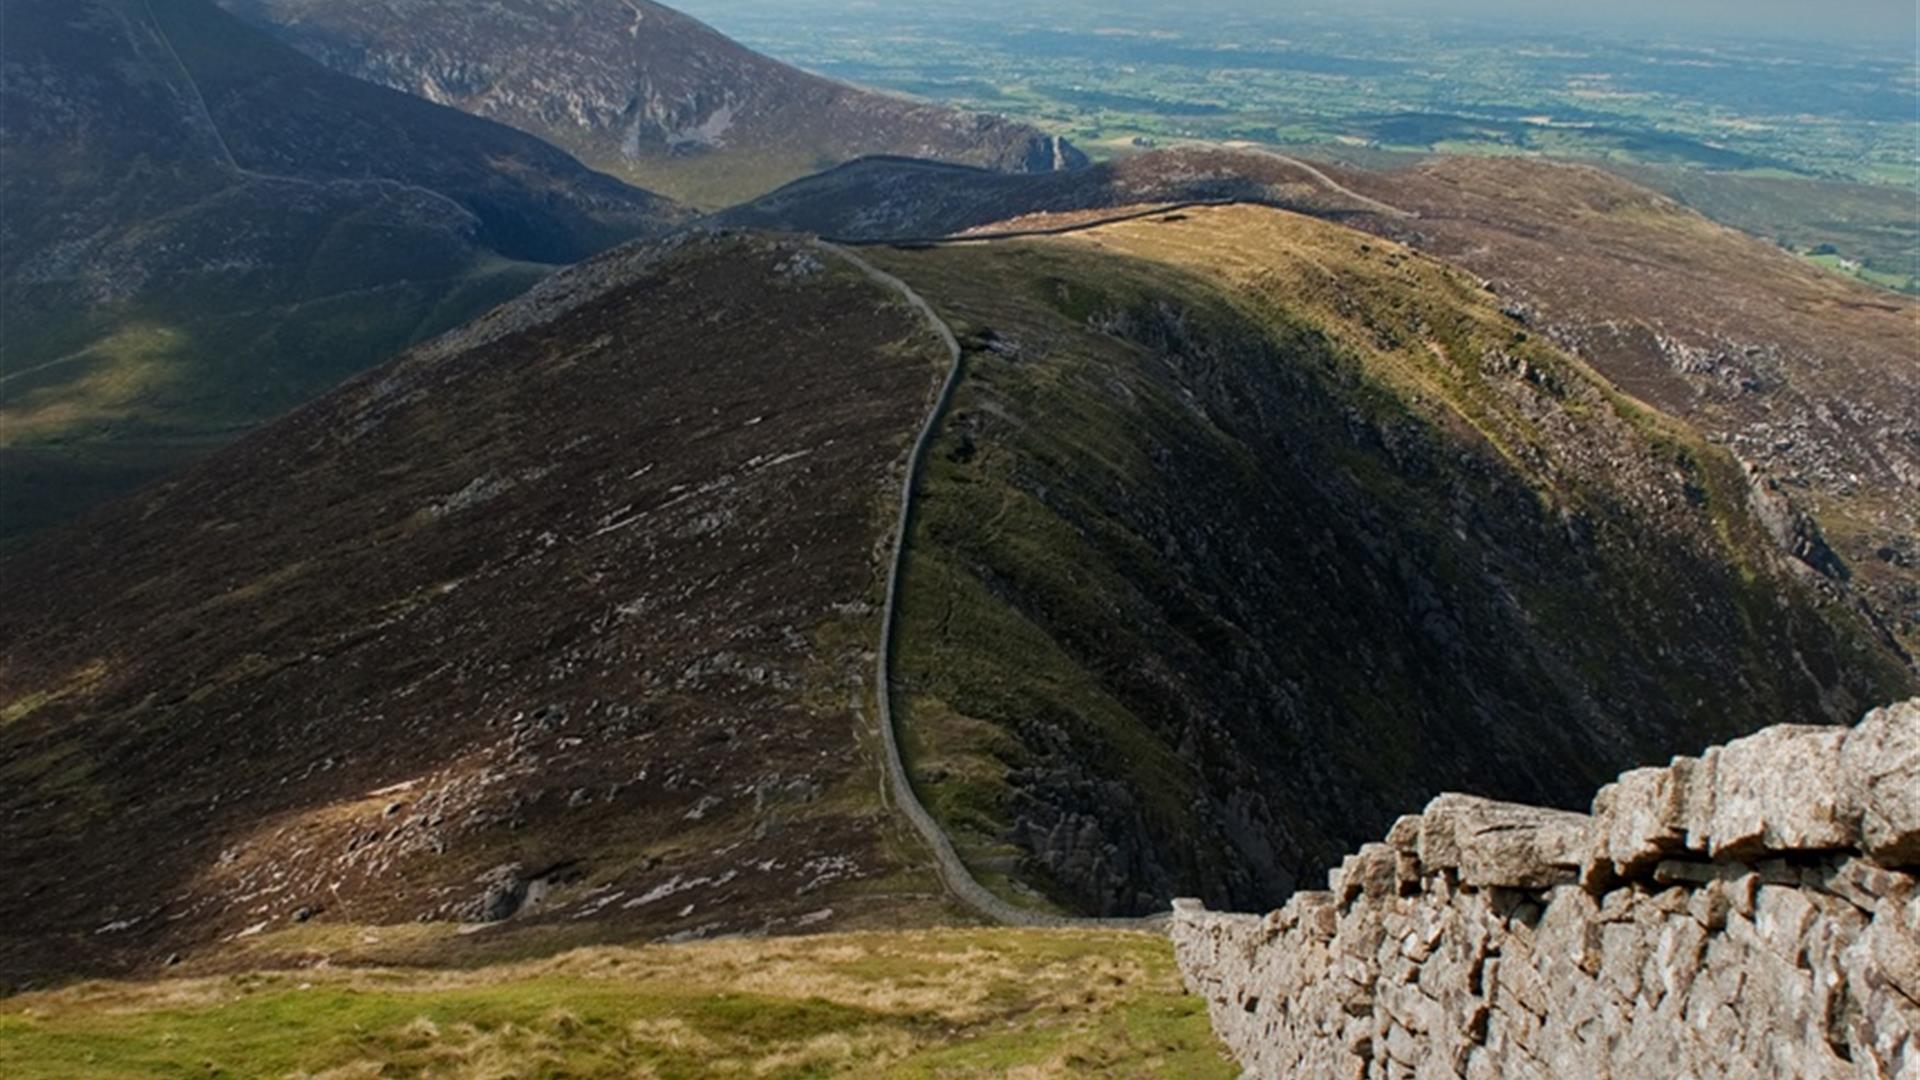 Mourne Wall Challenge